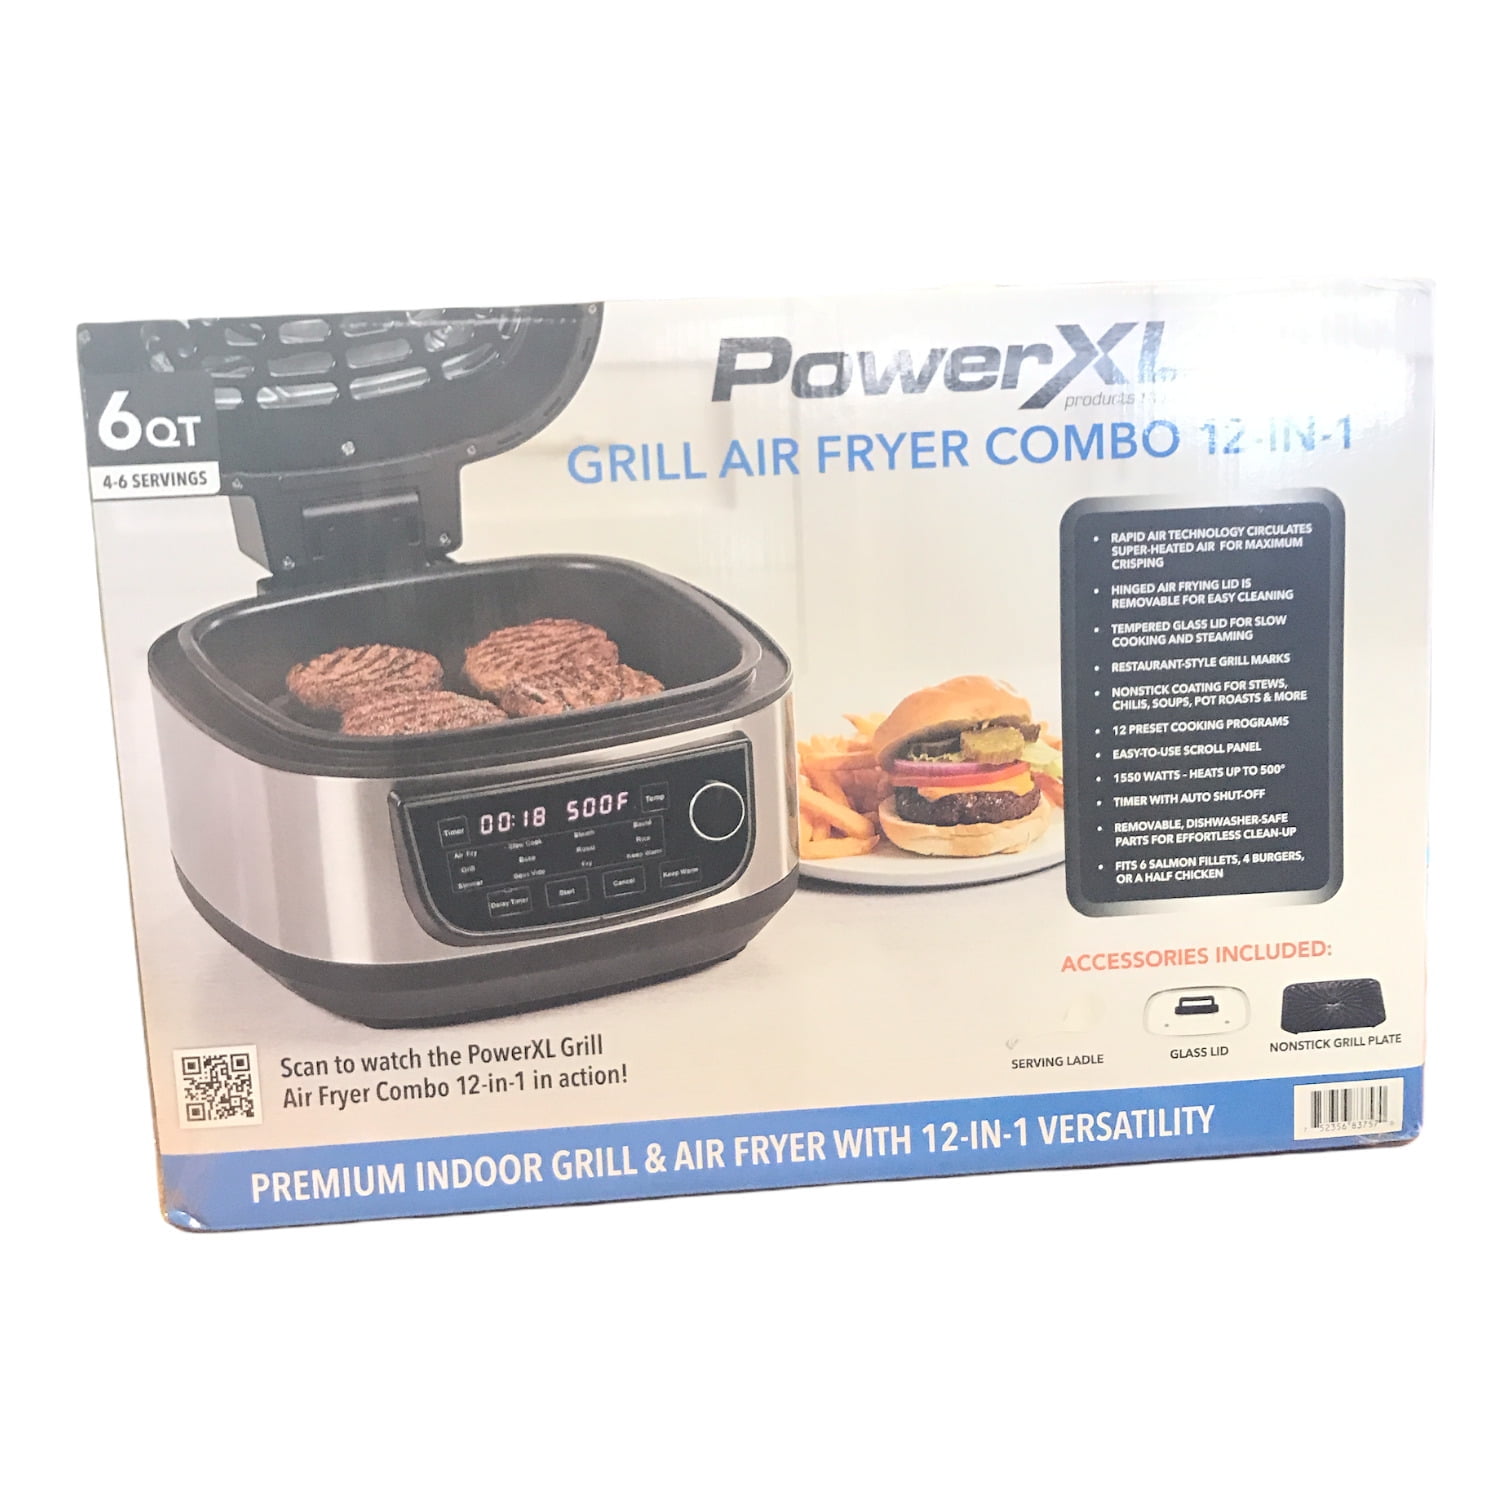 Powerxl Grill Air Fryer Combo In Stainless Steel/Black